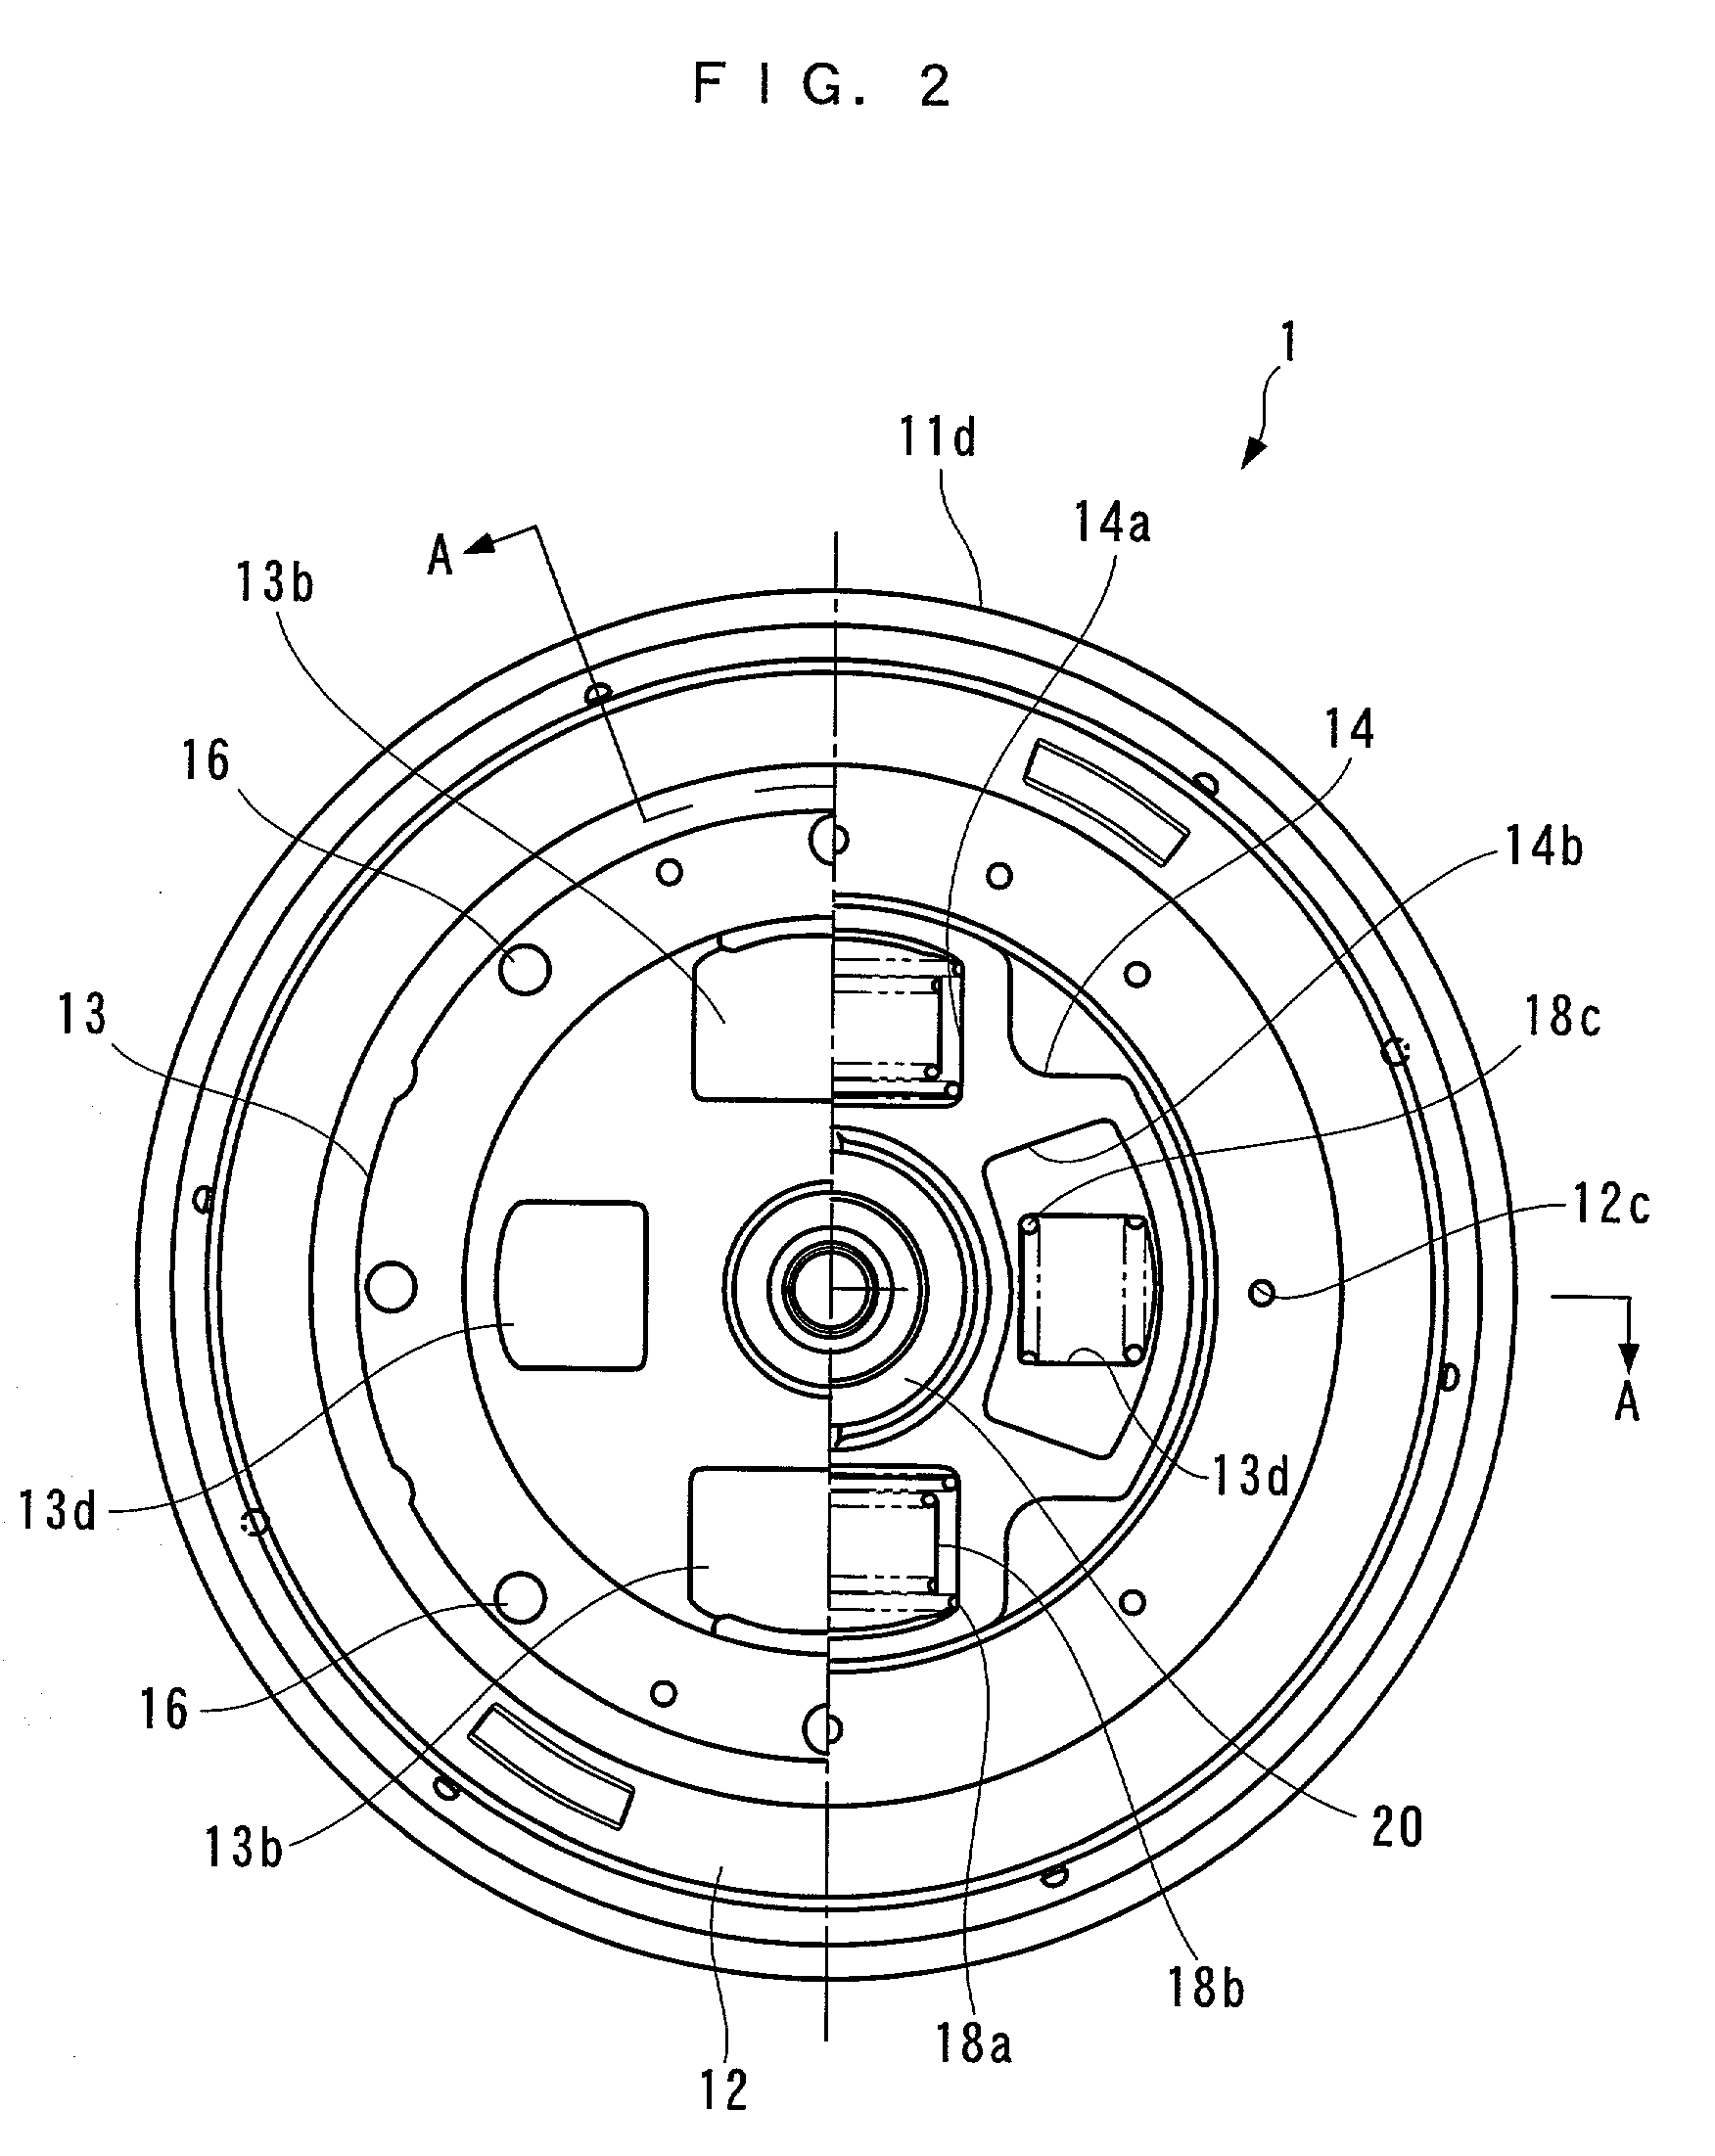 Flywheel device for prime mover